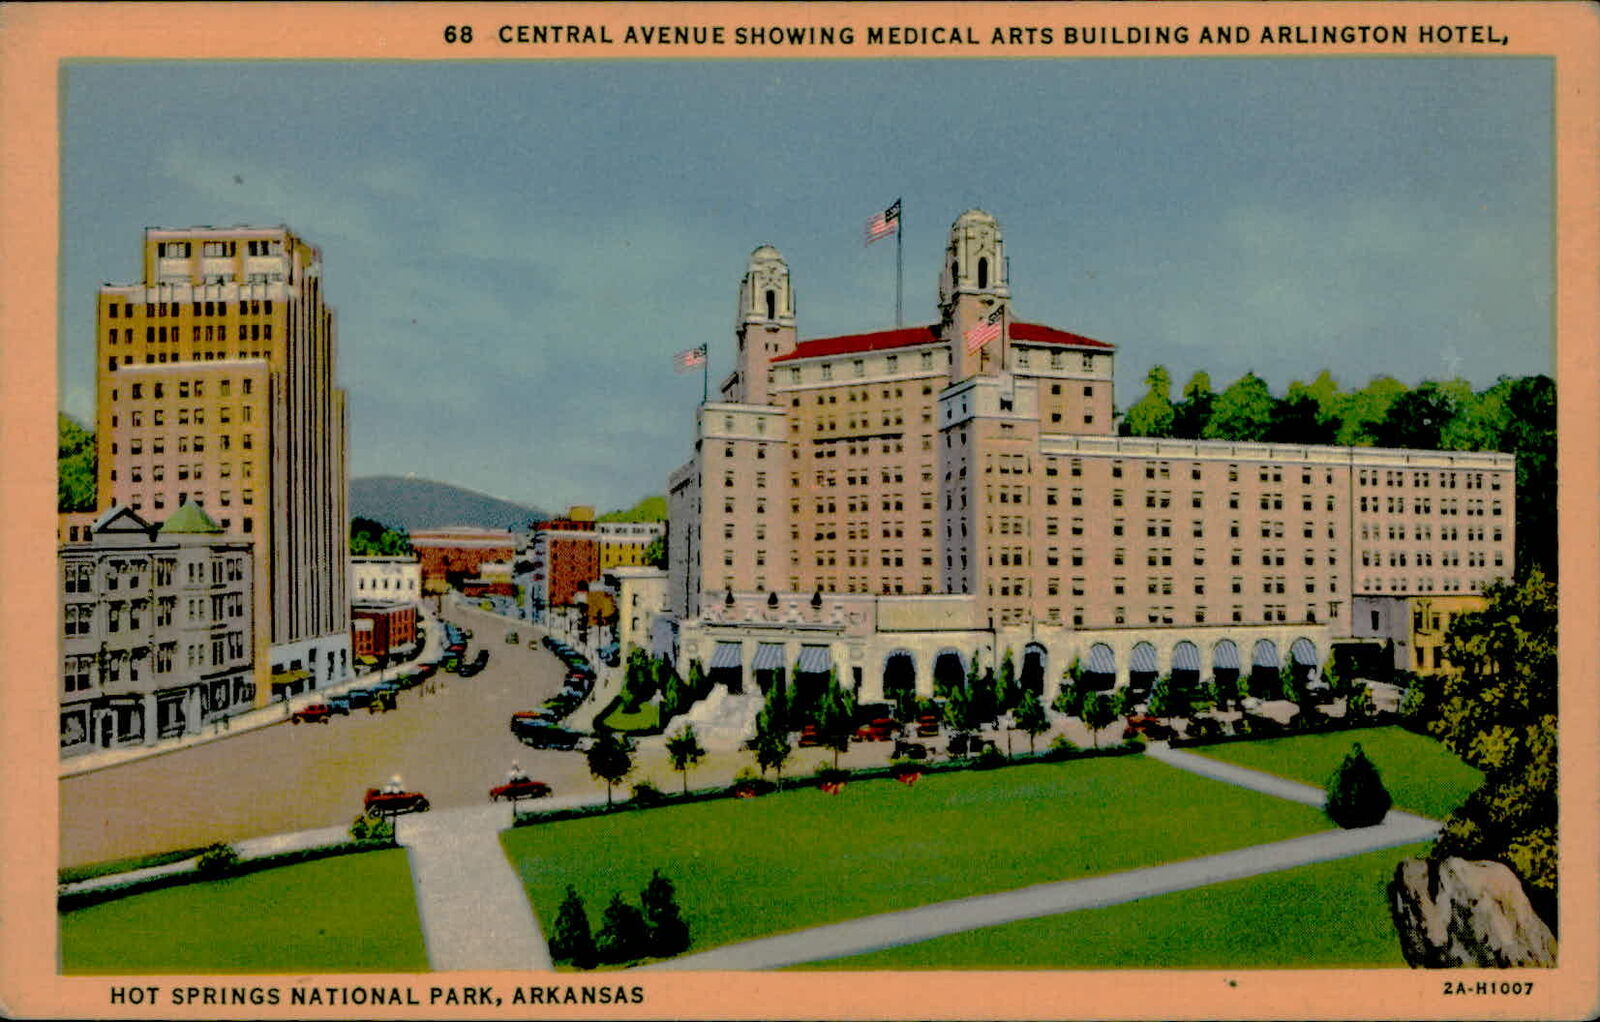 Postcard: 68 CENTRAL AVENUE SHOWING MEDICAL ARTS BUILDING AND ARLINGTO